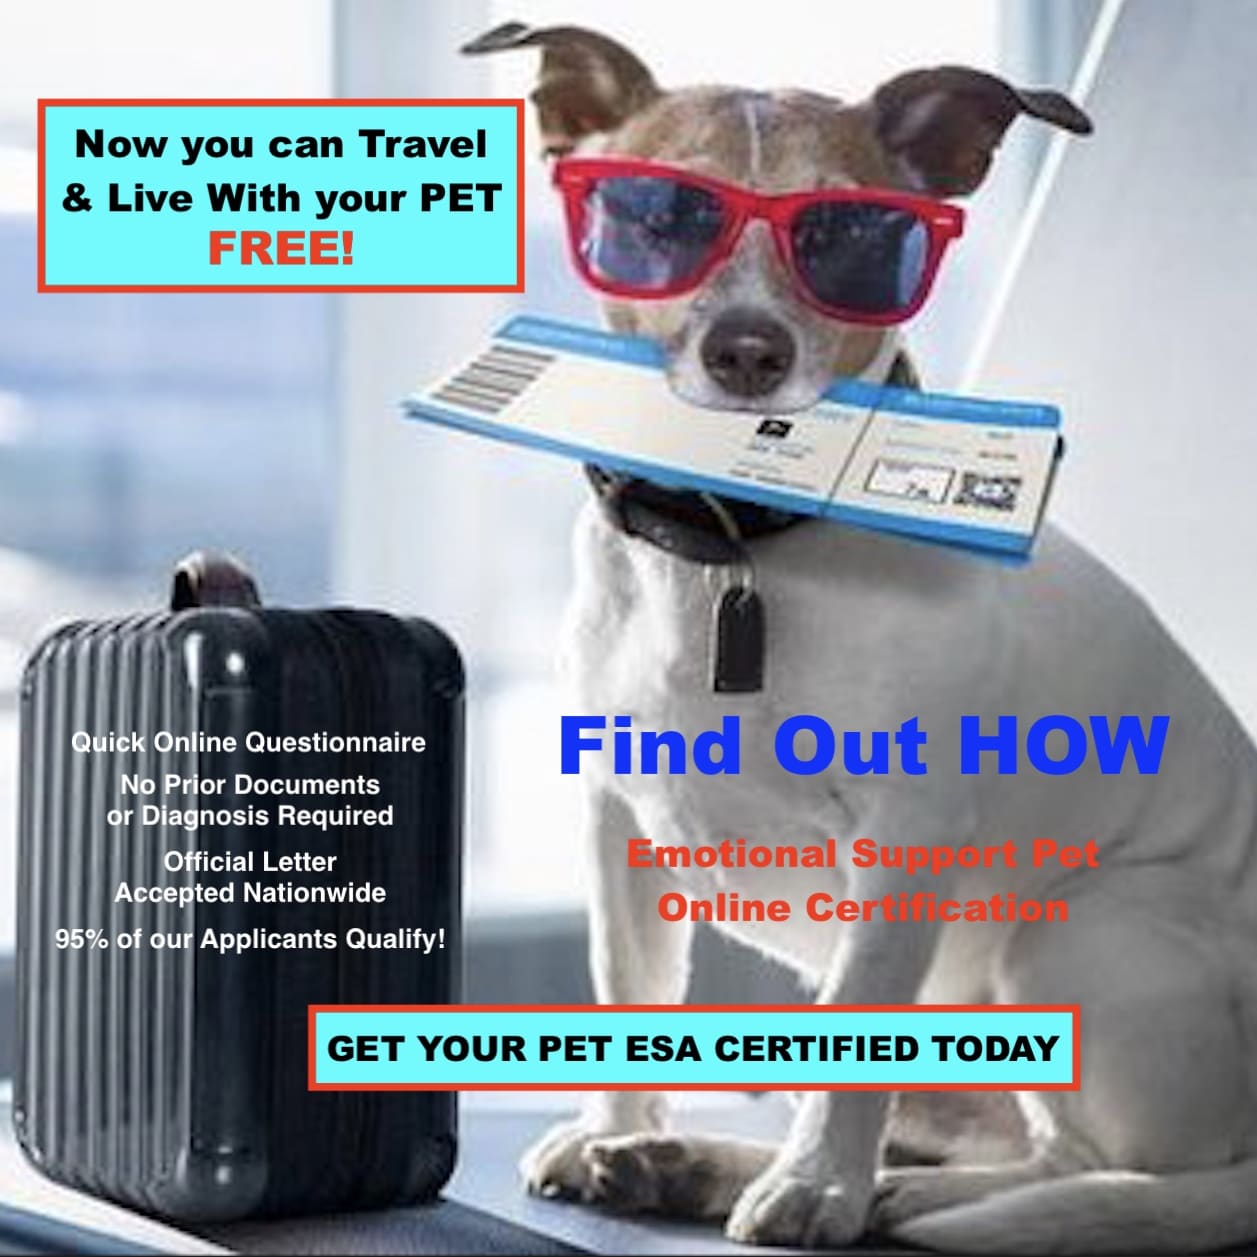 NOW YOU CAN TRAVEL AND LIVE WITH YOUR PET- FREE!